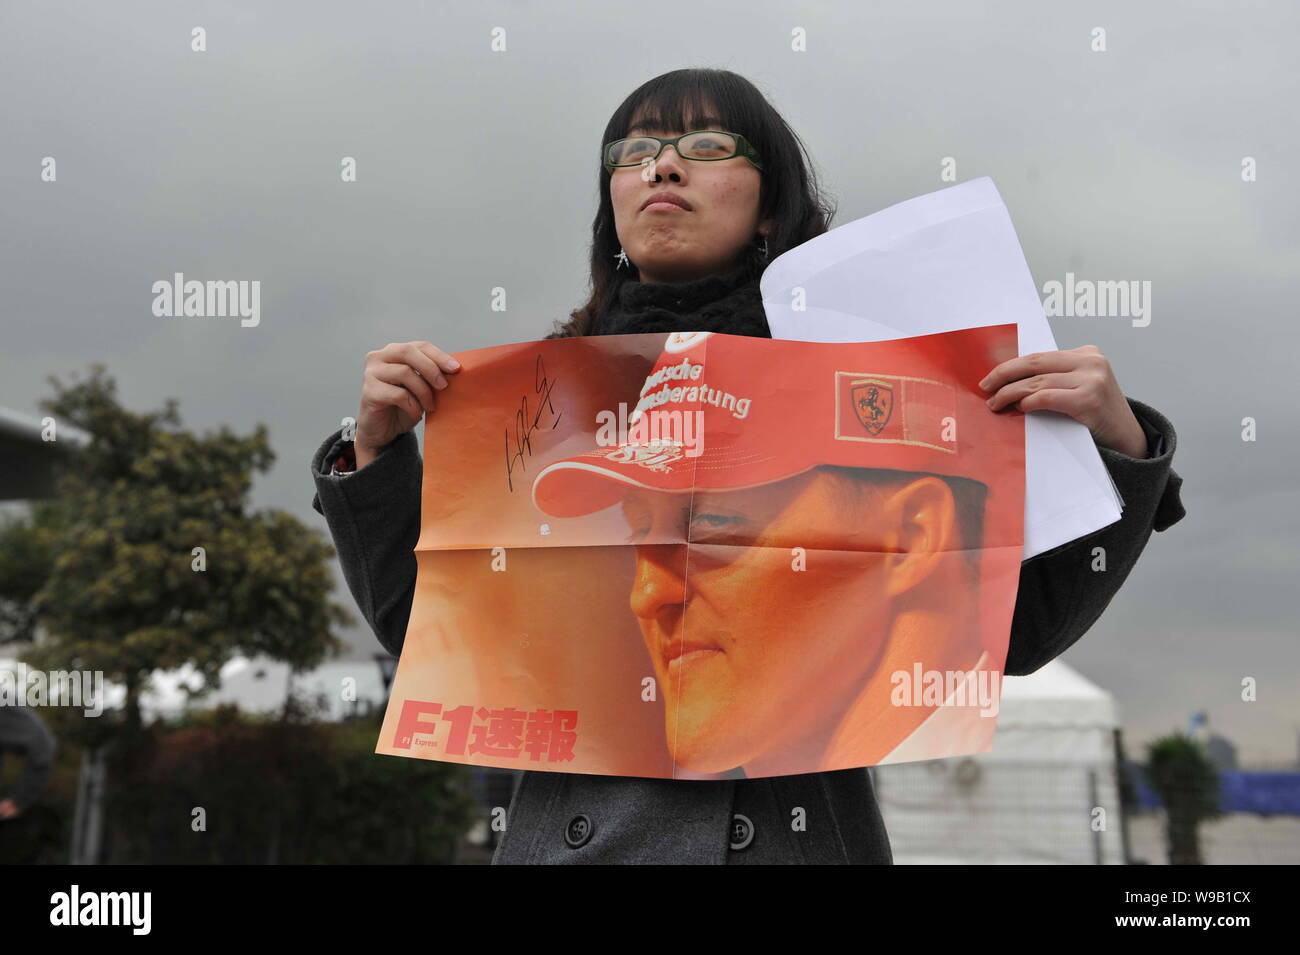 A Chinese girl holds a poster of German F1 driver Michael Schumacher of Mercedes GP team to show her support at the Shanghai International Circuit in Stock Photo